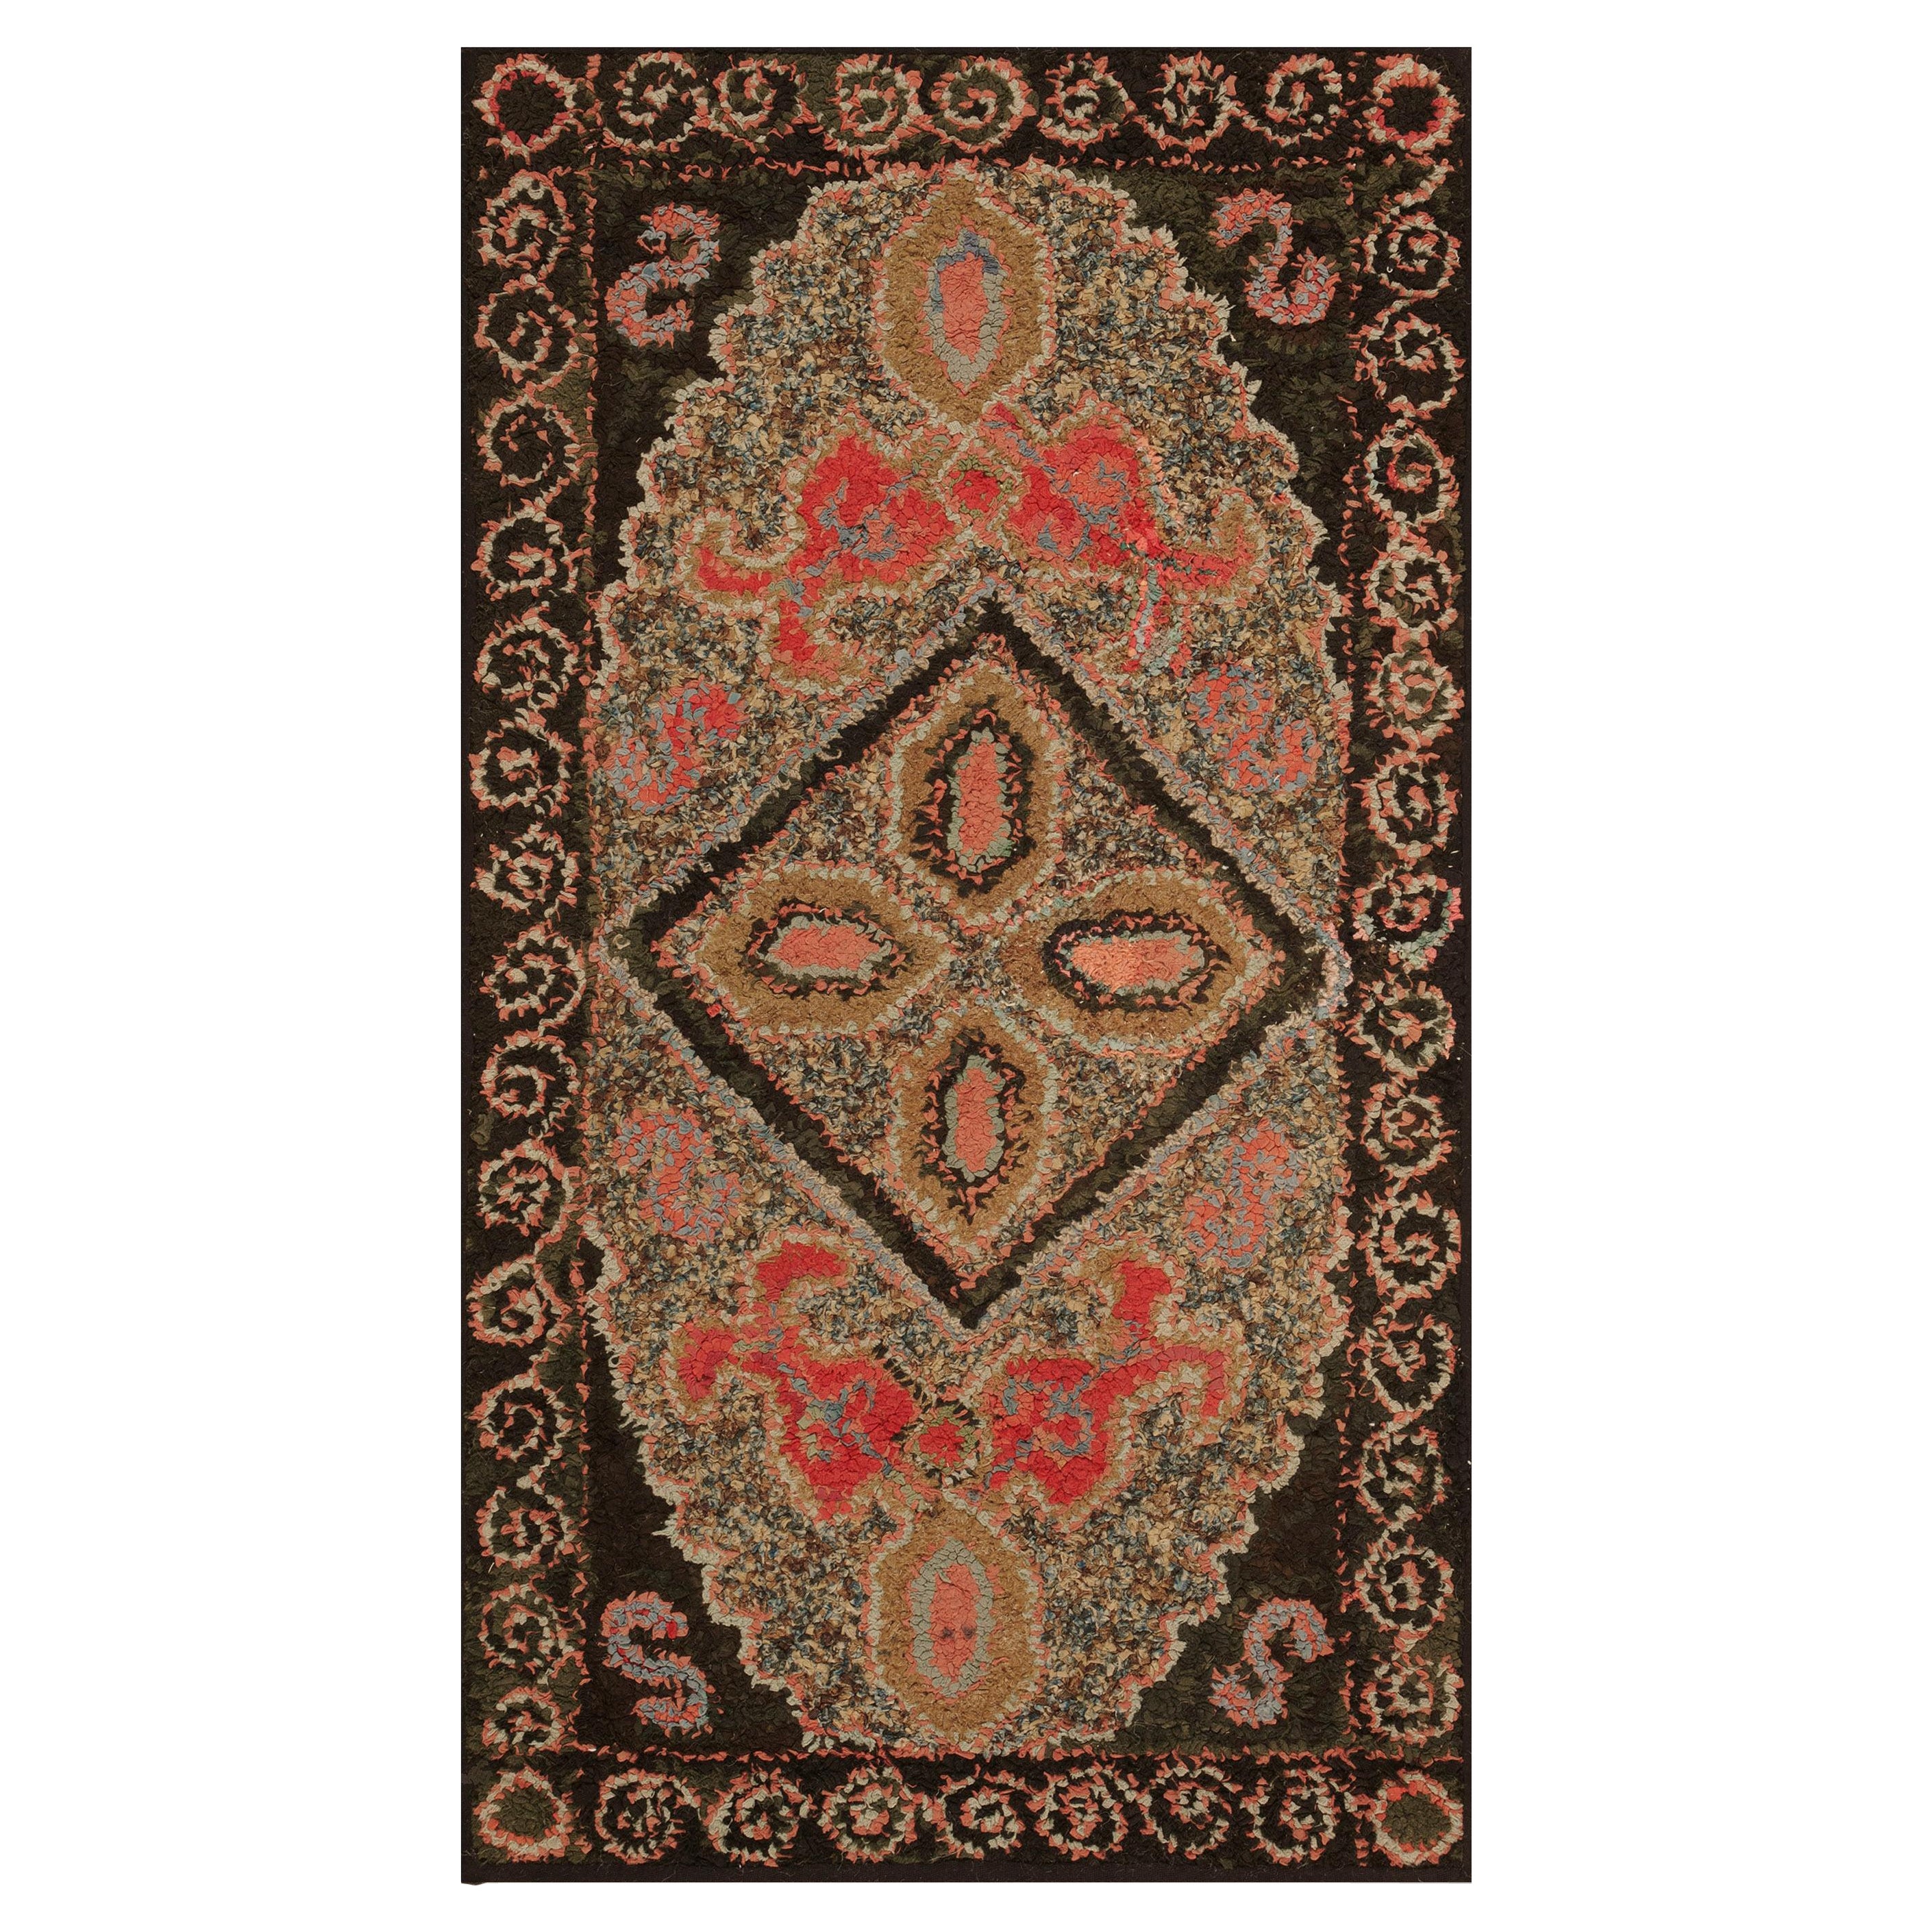 Early 20th Century American Hooked Rug ( 1' 10" x 3' 4" - 56 x 102 cm ) For Sale